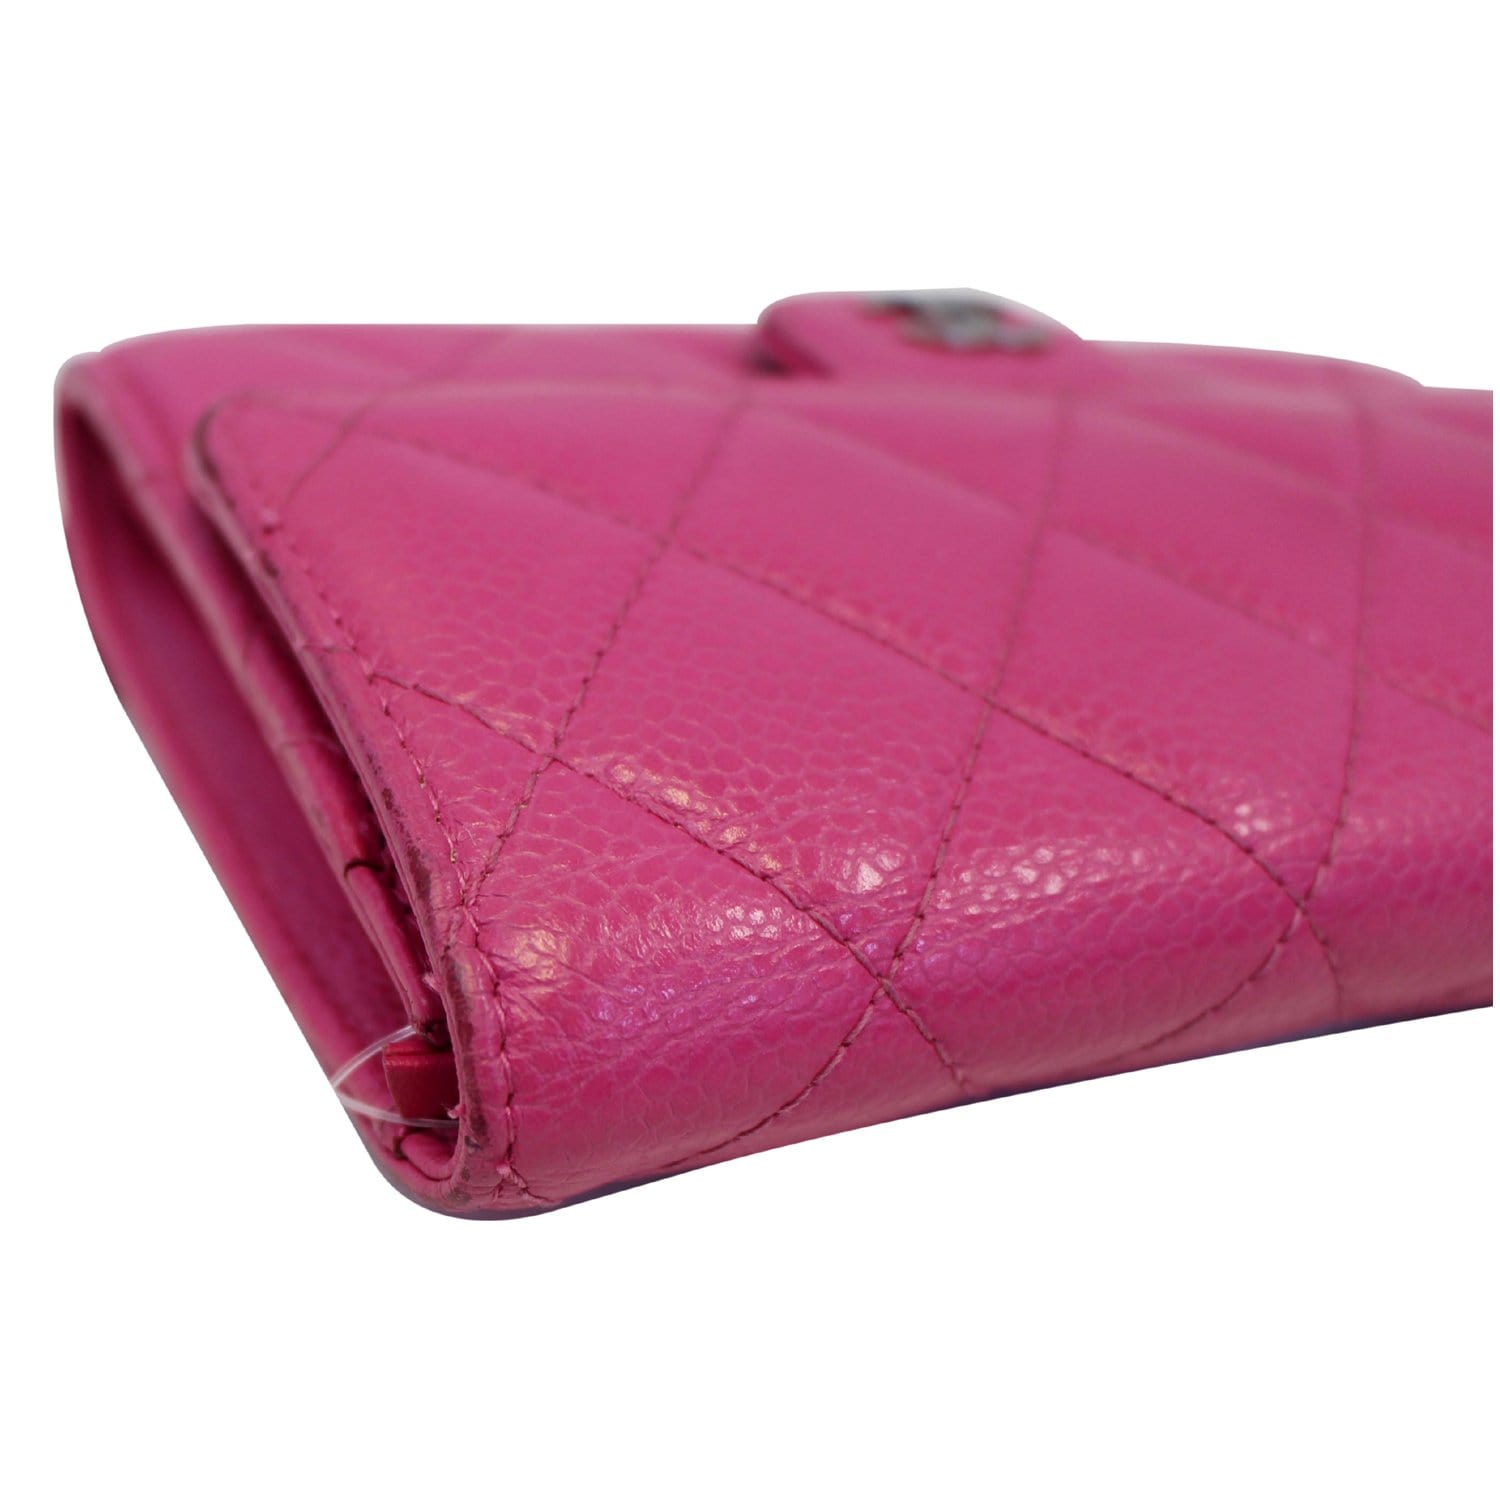 Timeless/classique leather wallet Chanel Pink in Leather - 37671022